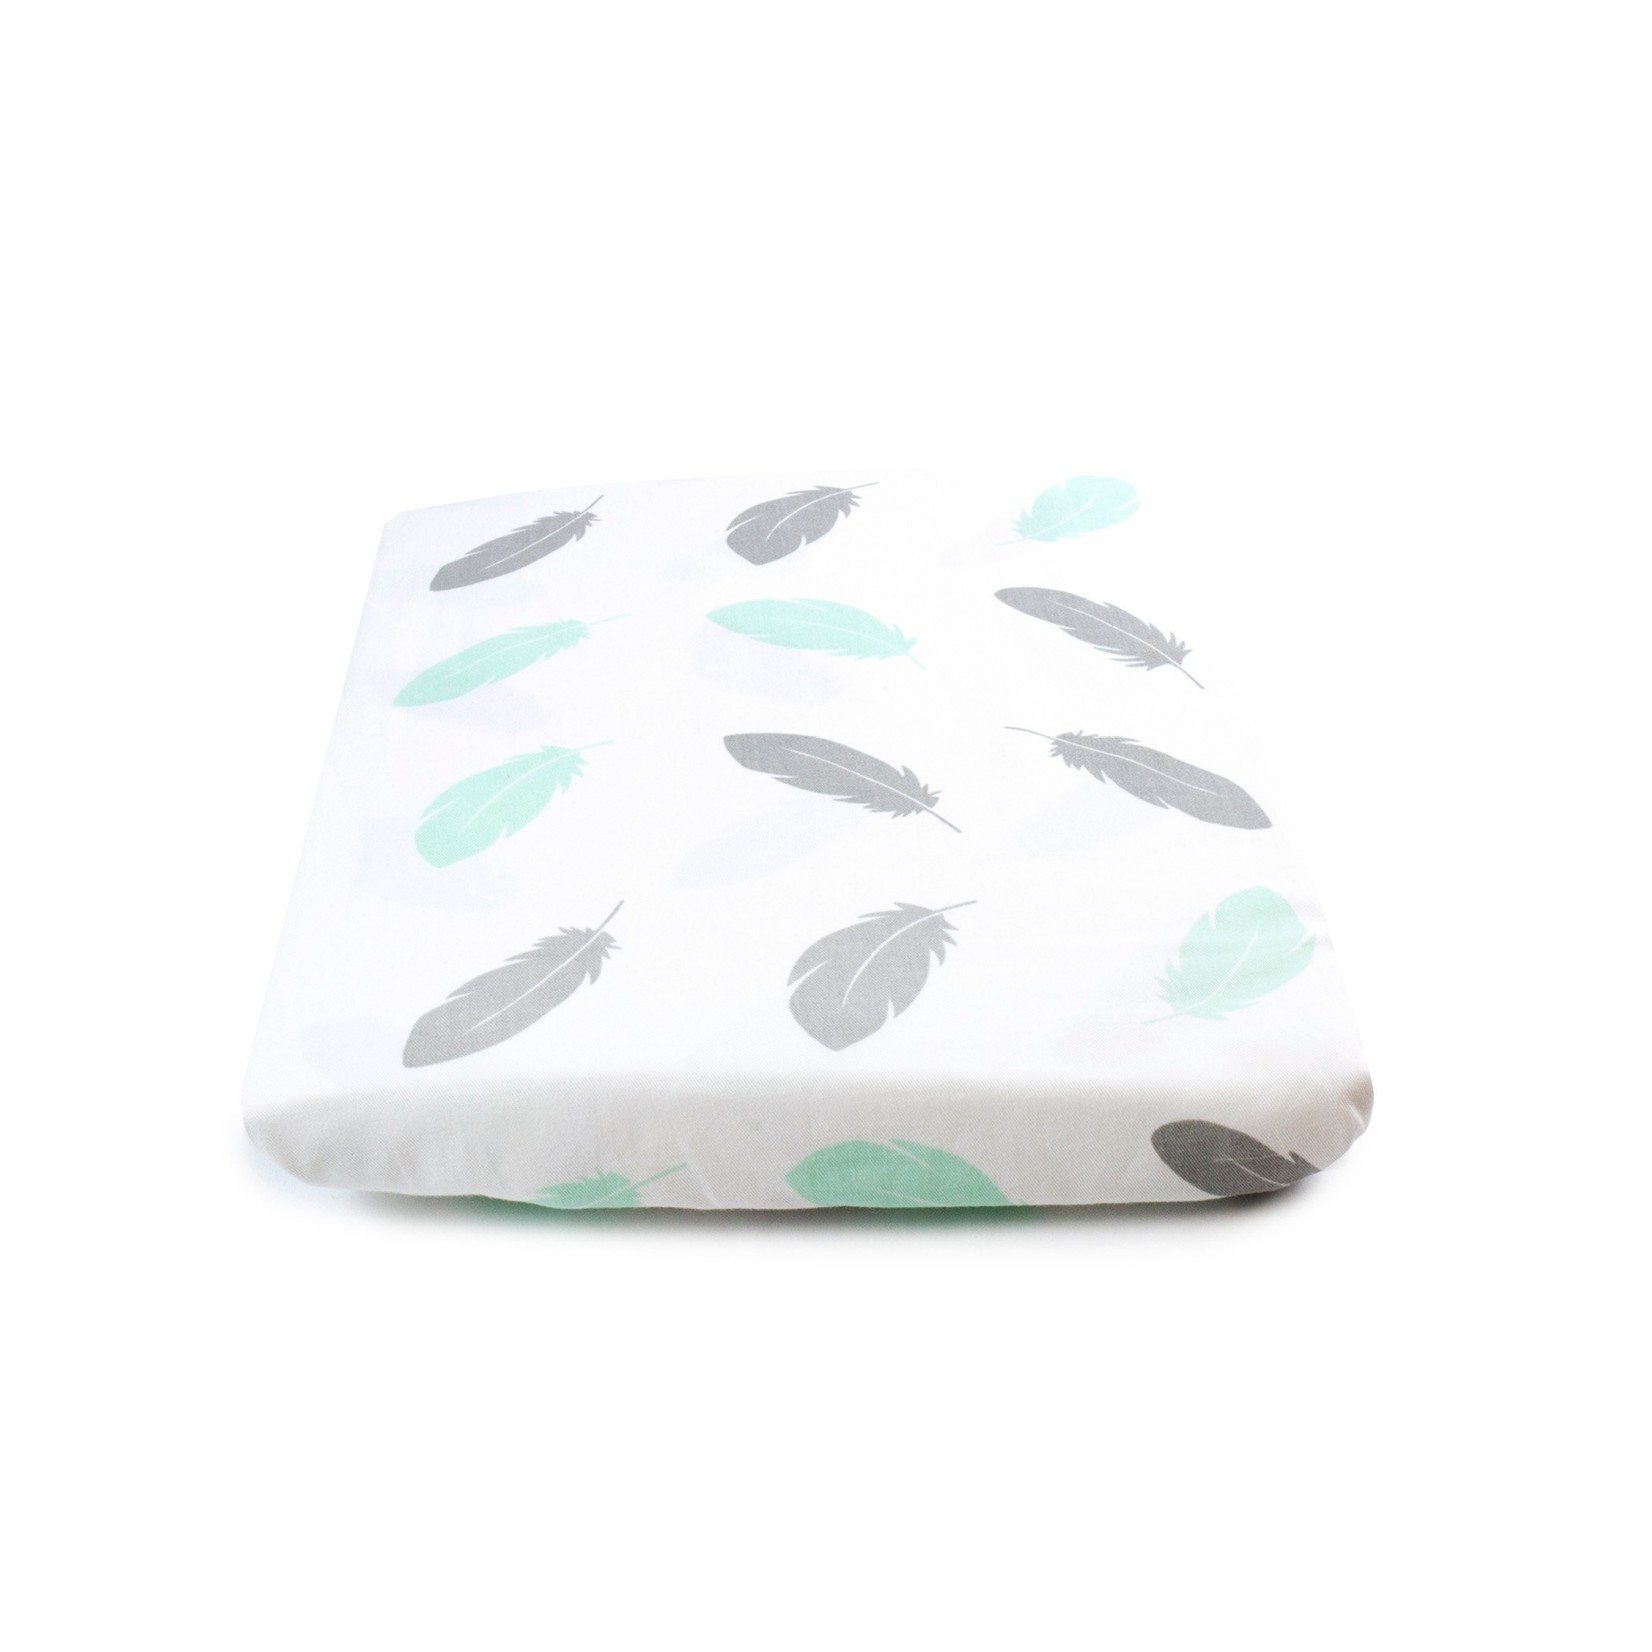 Bubba Blue New Organic Feathers Cot Fitted Sheet